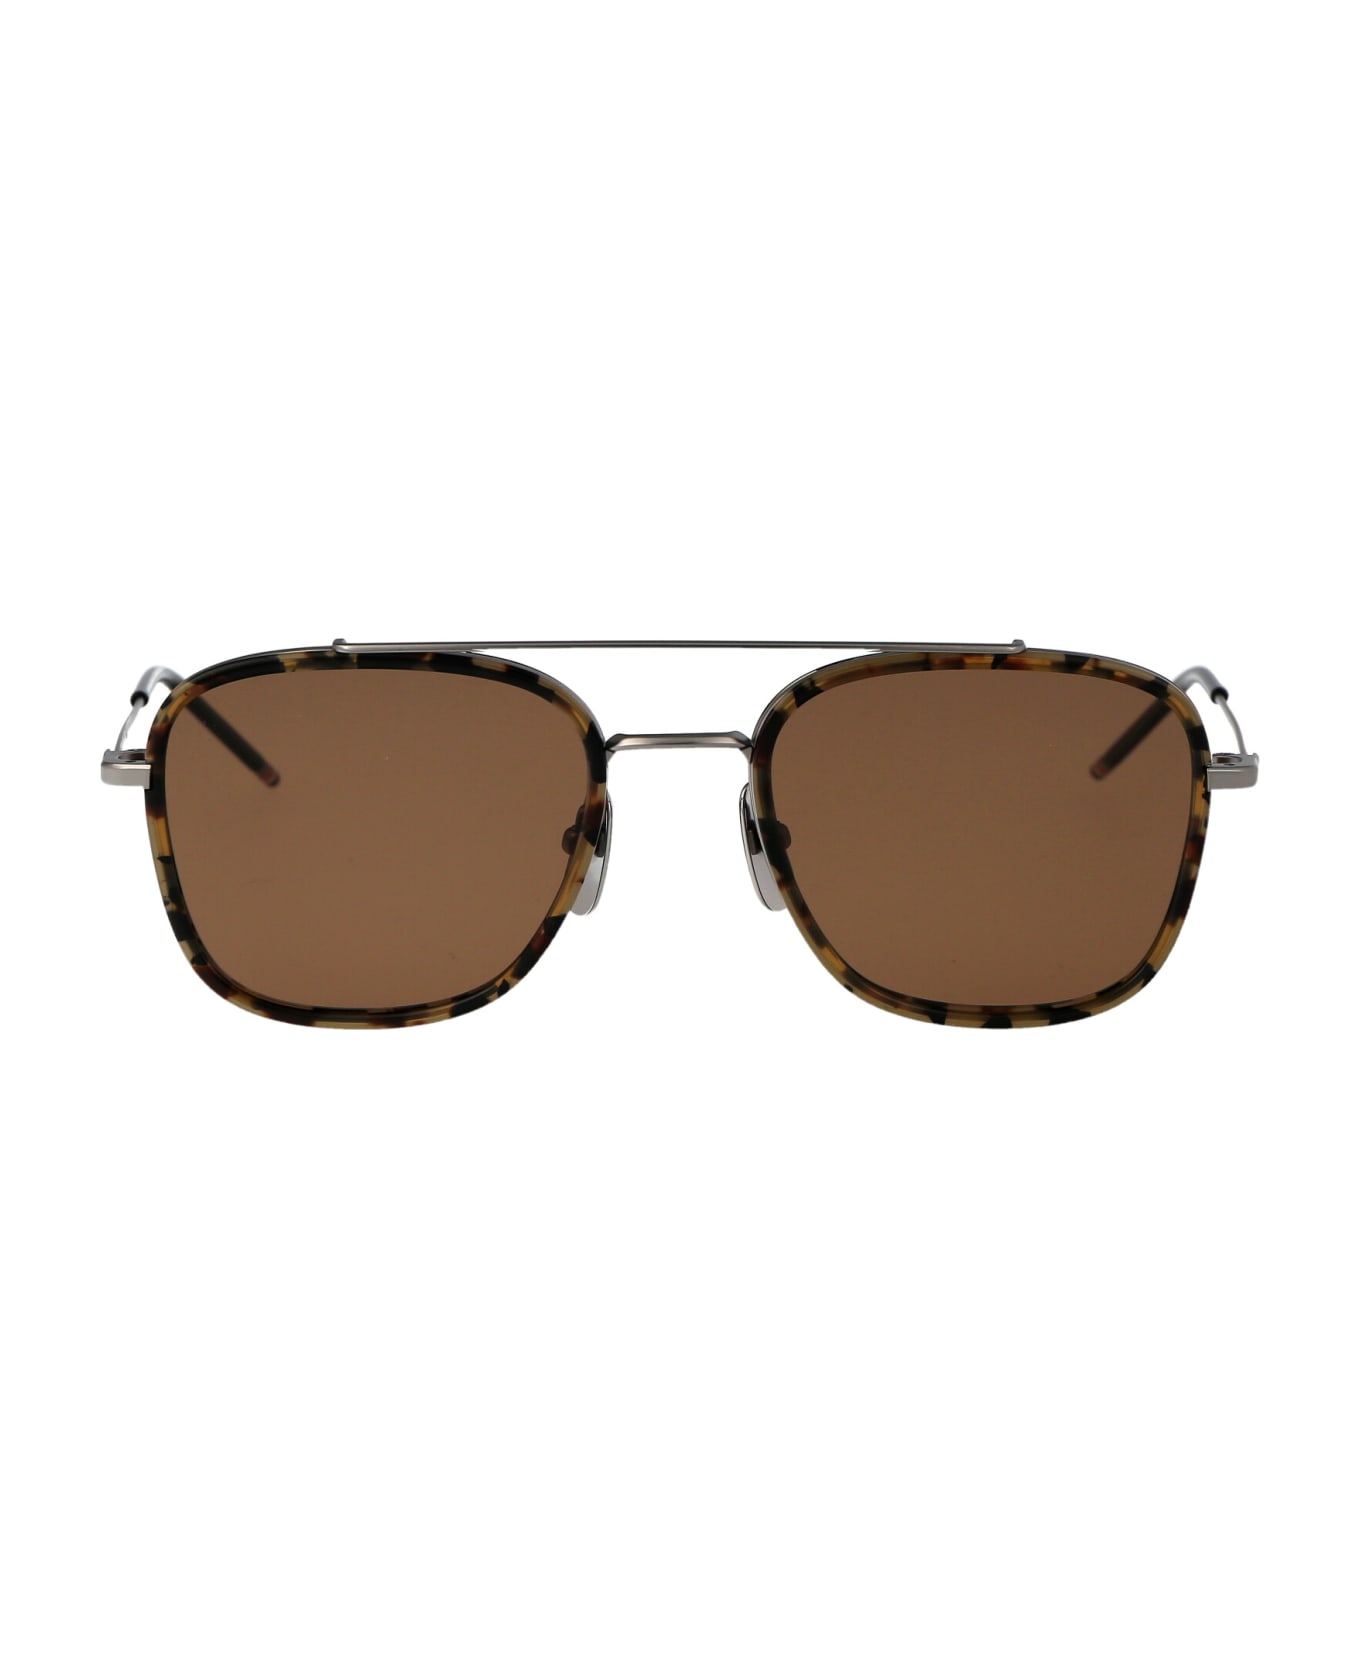 Thom Browne Ues800a-g0003-205-51 Sunglasses - 205 LIGHT SILVER サングラス